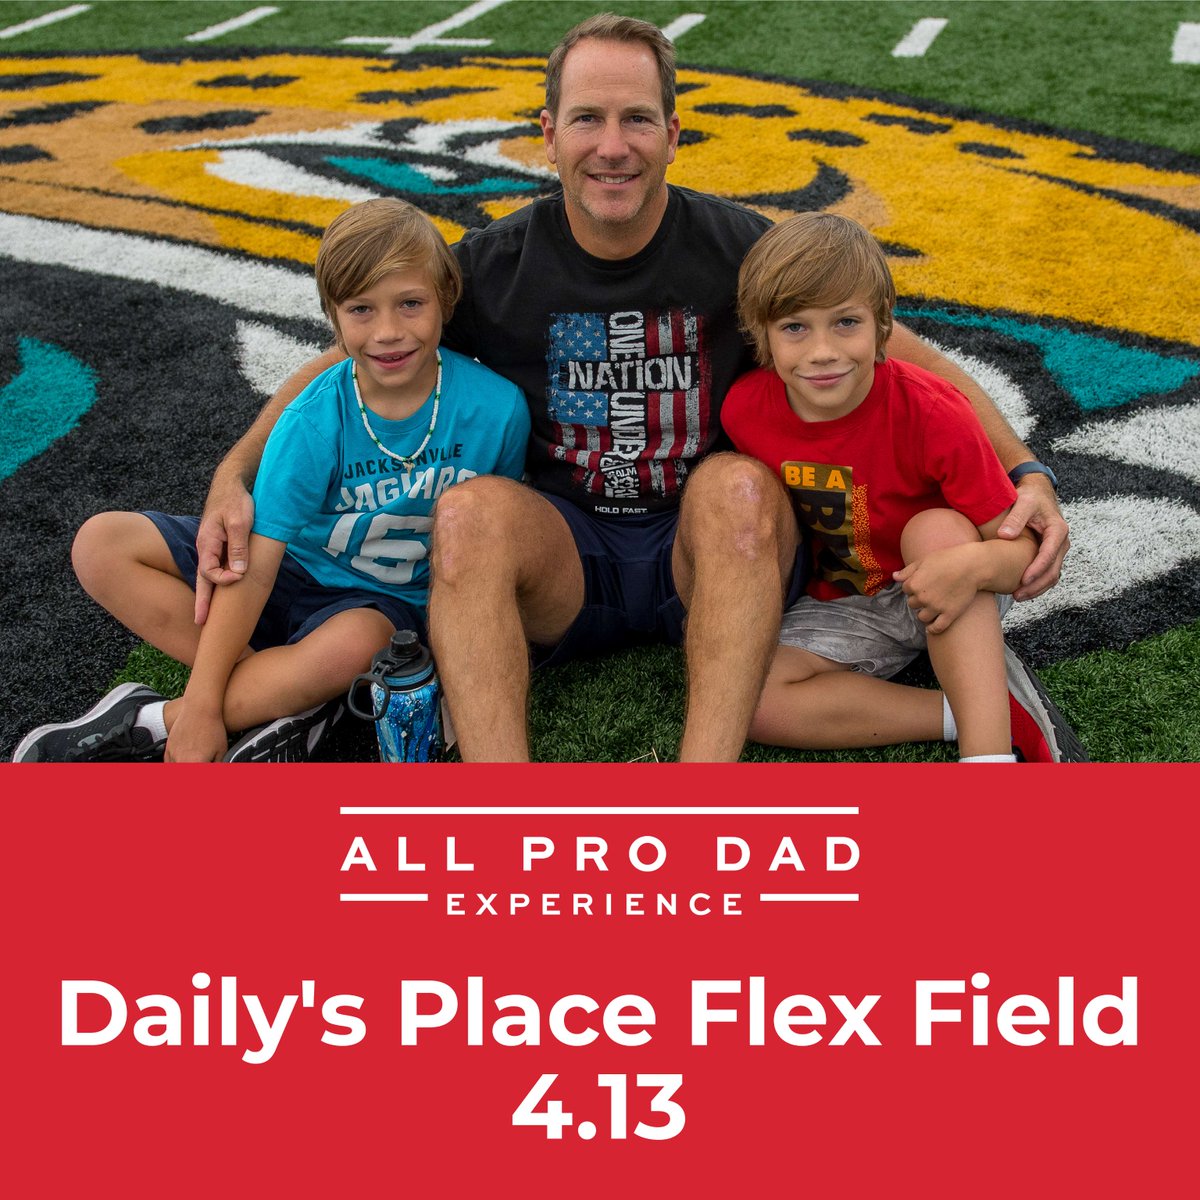 Join @Jaguars Head Football Coach Doug Pederson at the @DailysPlace Flex Field on April 13th for a morning your family will never forget at the @AllProDad Experience! For more information & tickets visit allprodad.com/jacksonville-a….